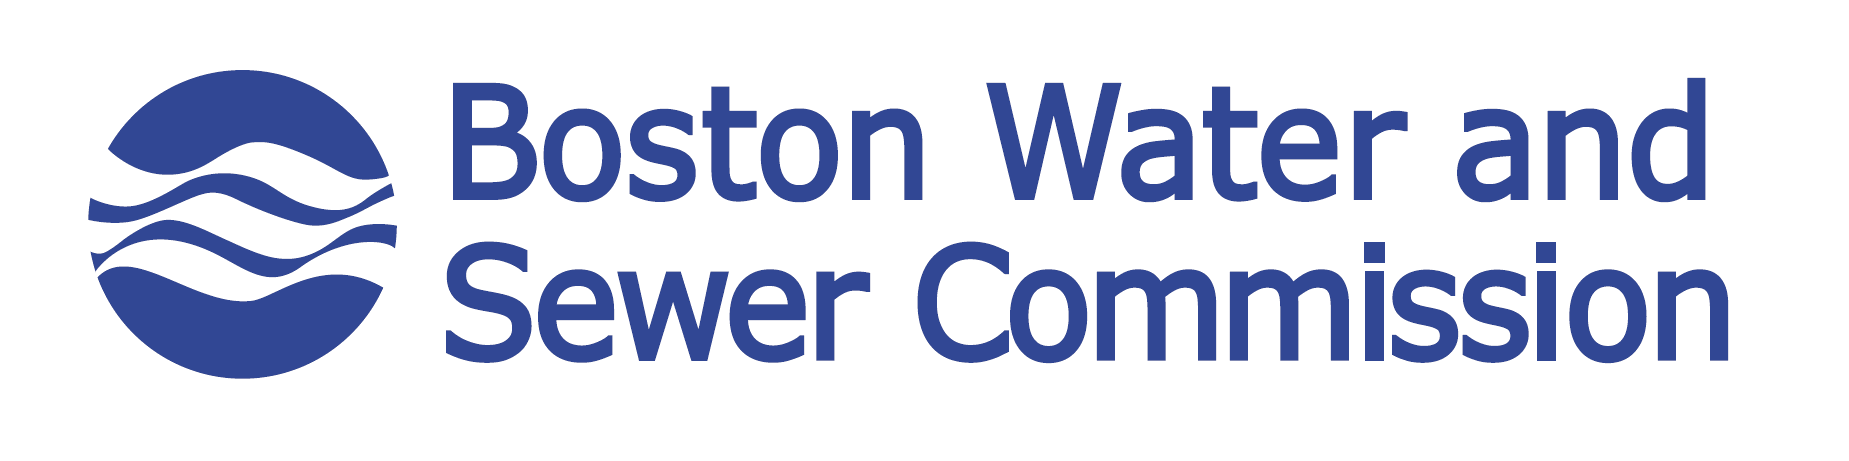 Boston Water and Sewer Commission Logo